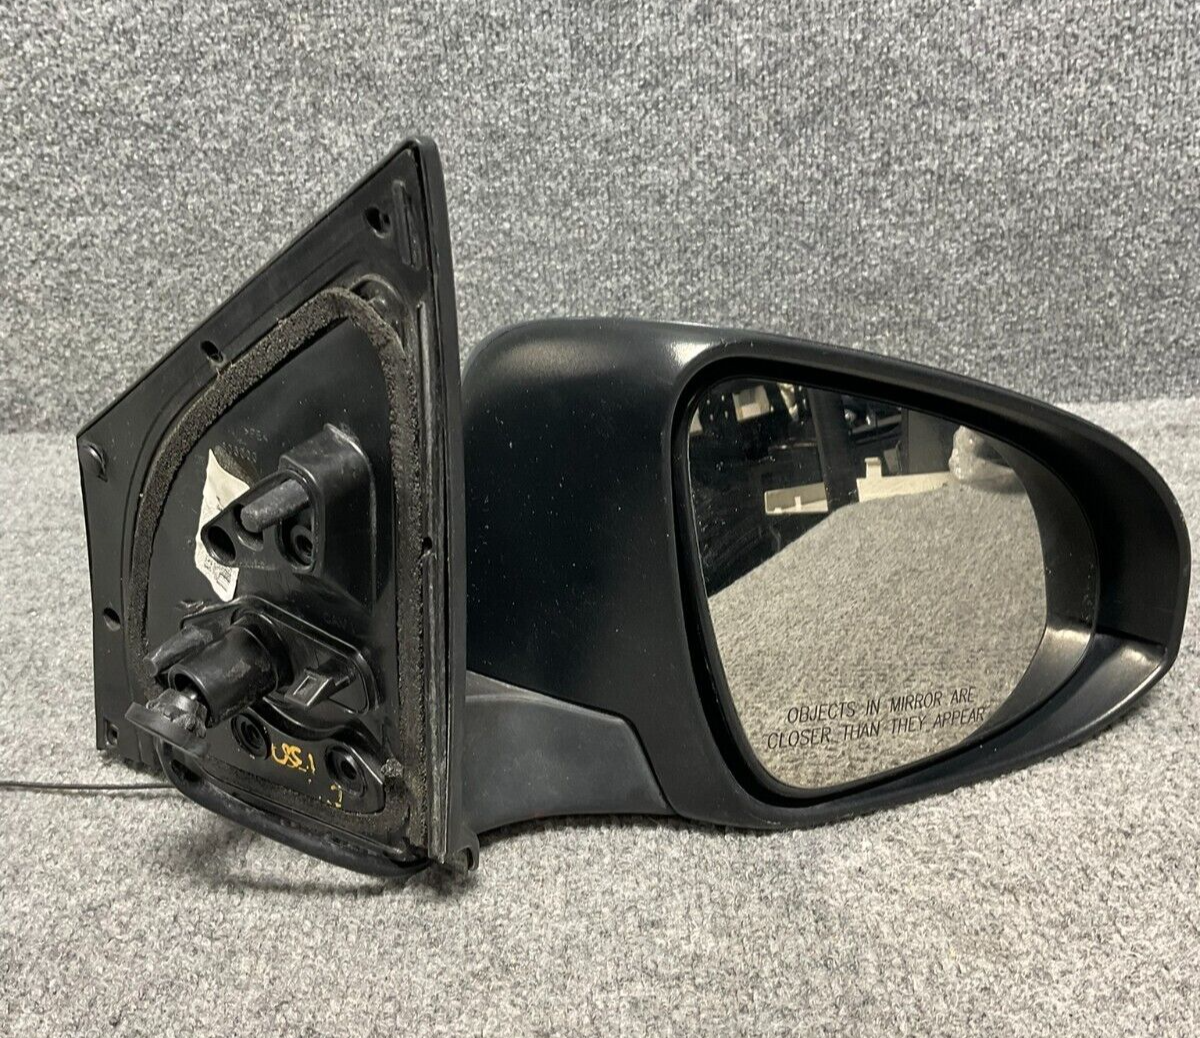 14-18-Toyota-Corolla-Front-Right-Outside-Rear-View-Door-Mirror-87910-02F80-B1-335336771748